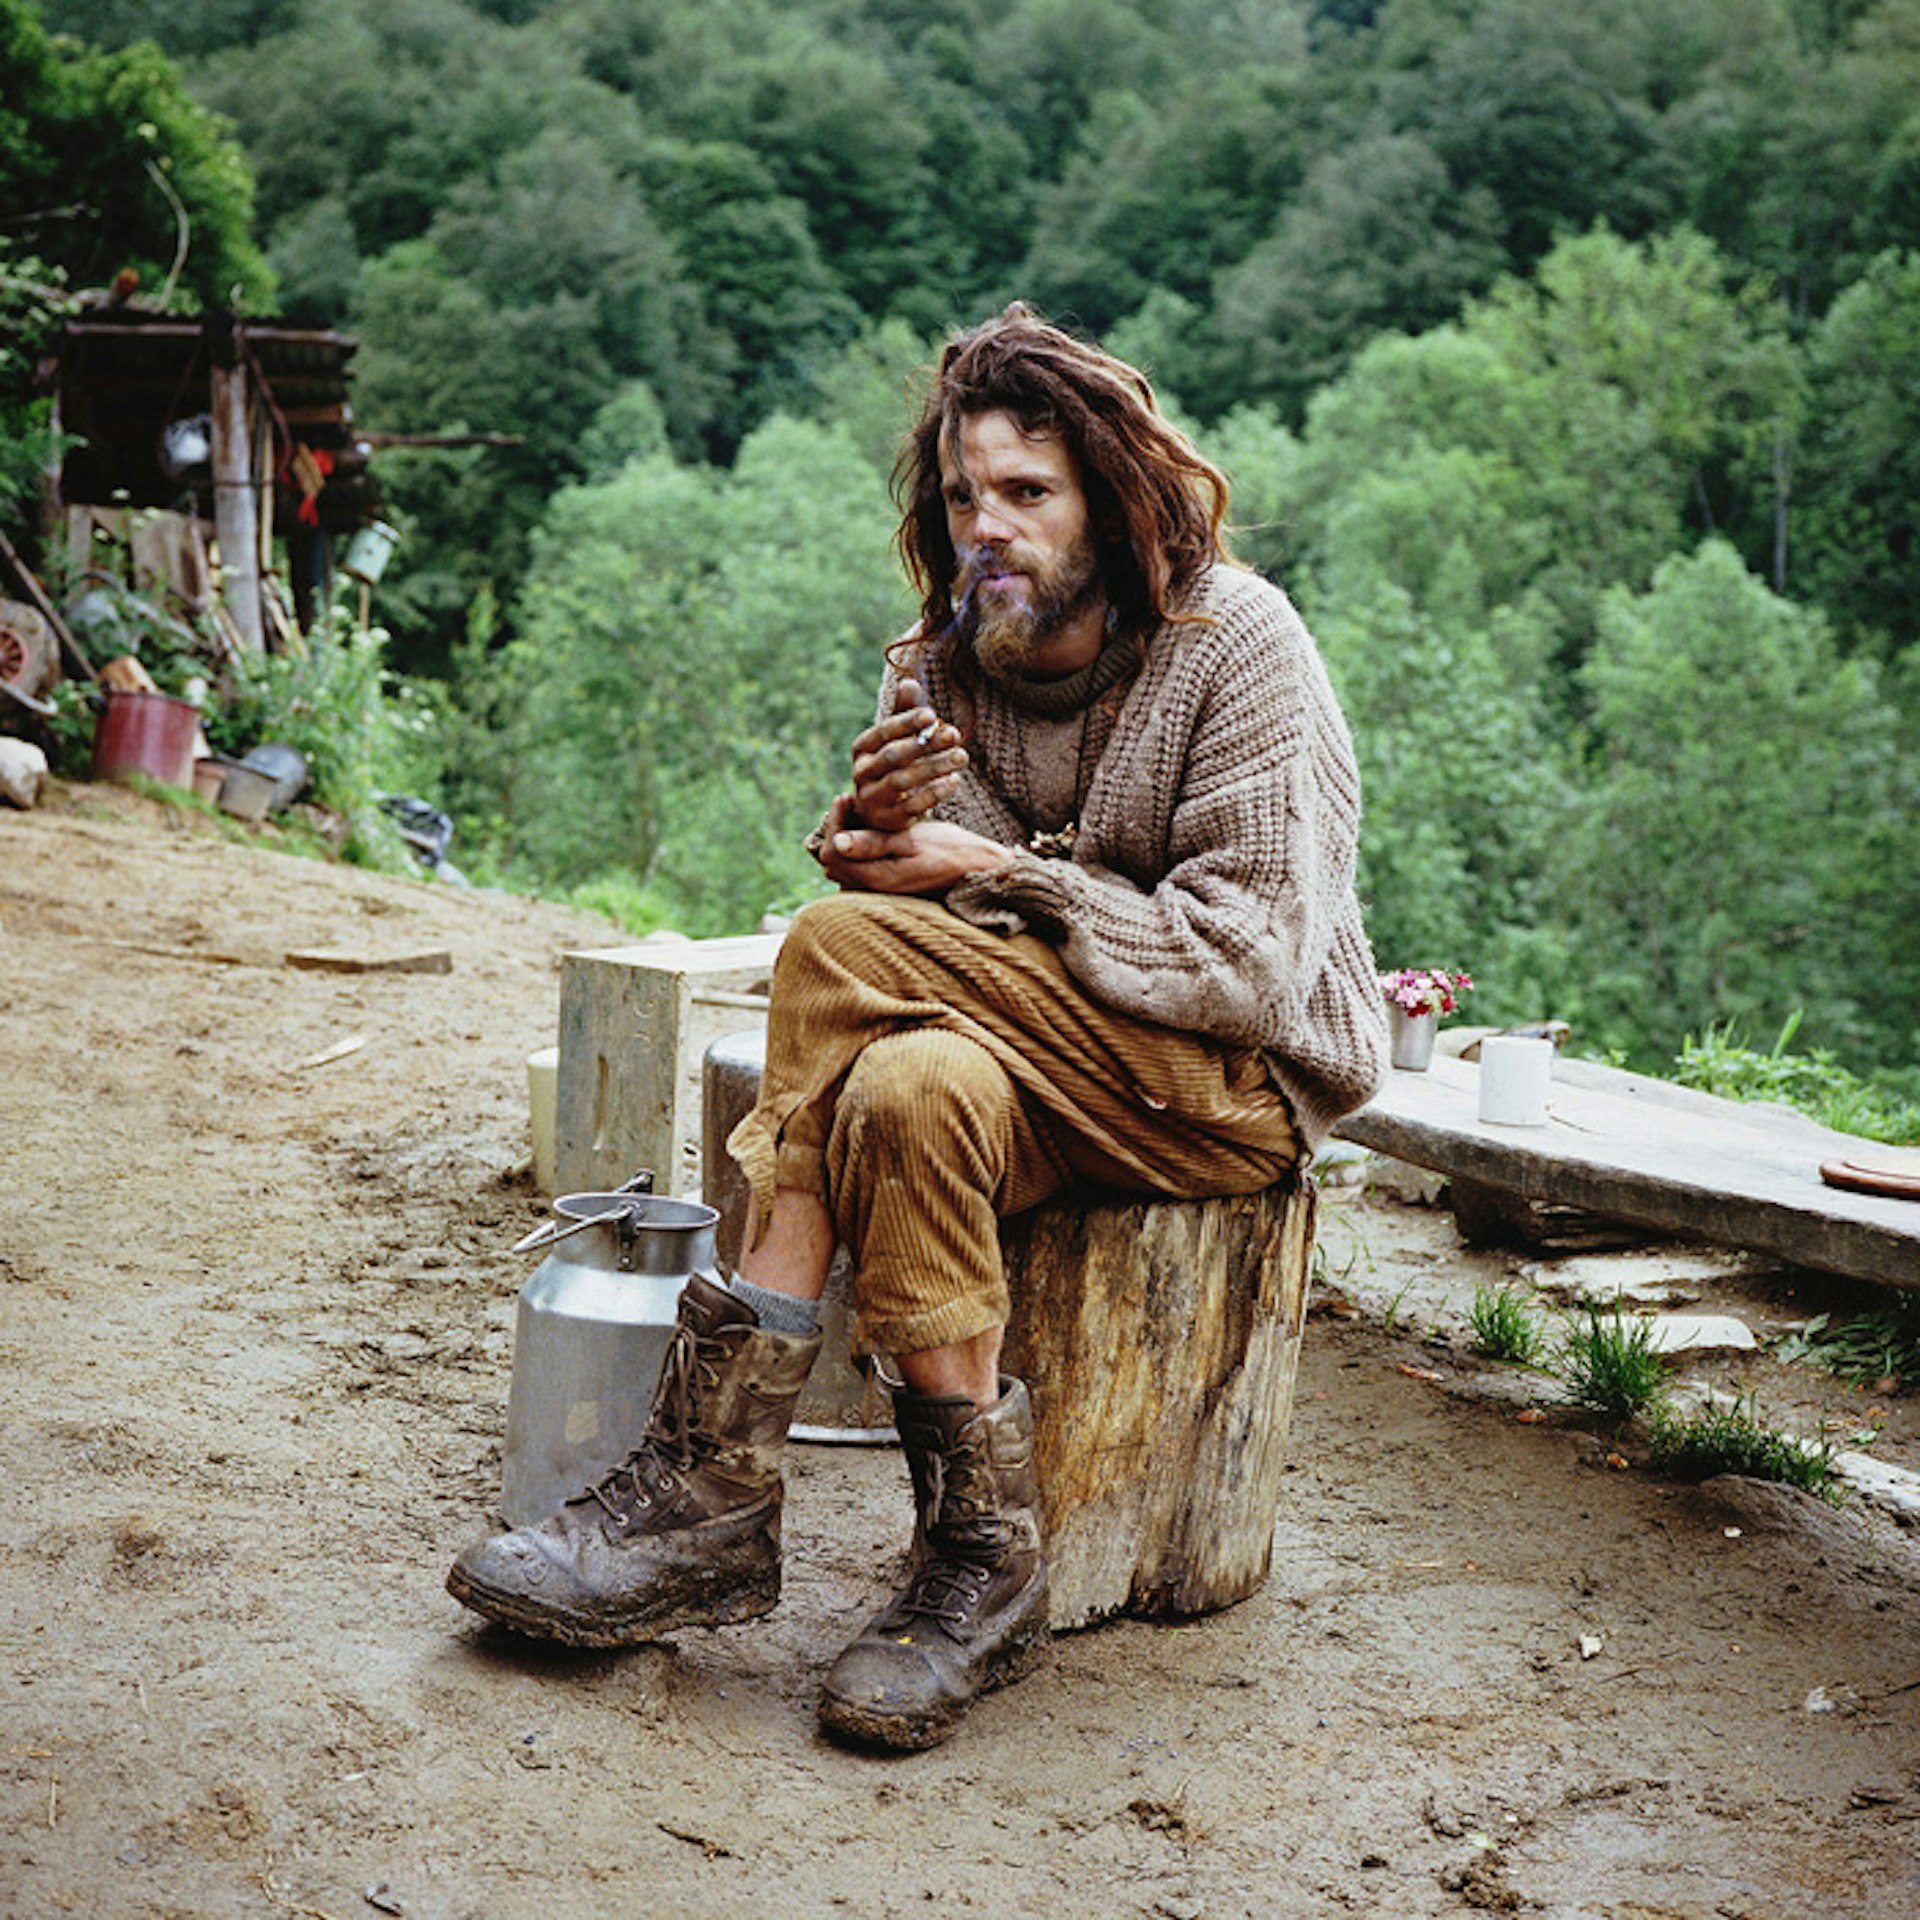 Vincent, a volunteer carpenter in the Pyrenees, 2012. "As a student, pursuing mathematics didn't make any sense for him," says photographer Antoine Bruy. "Instead he wanted a life closer to his convictions."